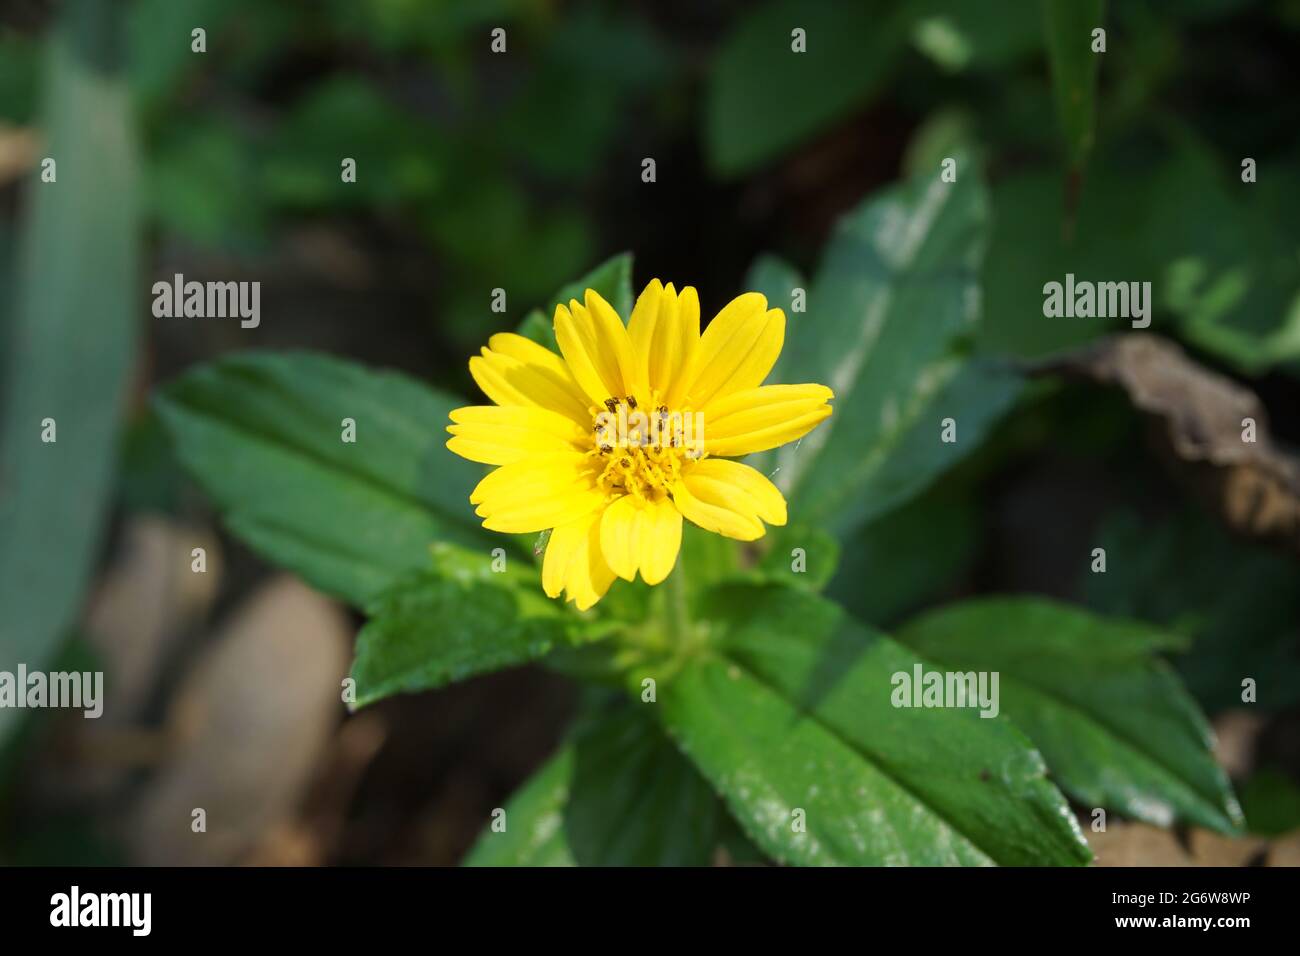 Sphagneticola trilobata with a natural background. Also called Bay Biscayne creeping oxeye, Singapore daisy, creeping oxeye, trailing daisy, wedelia Stock Photo